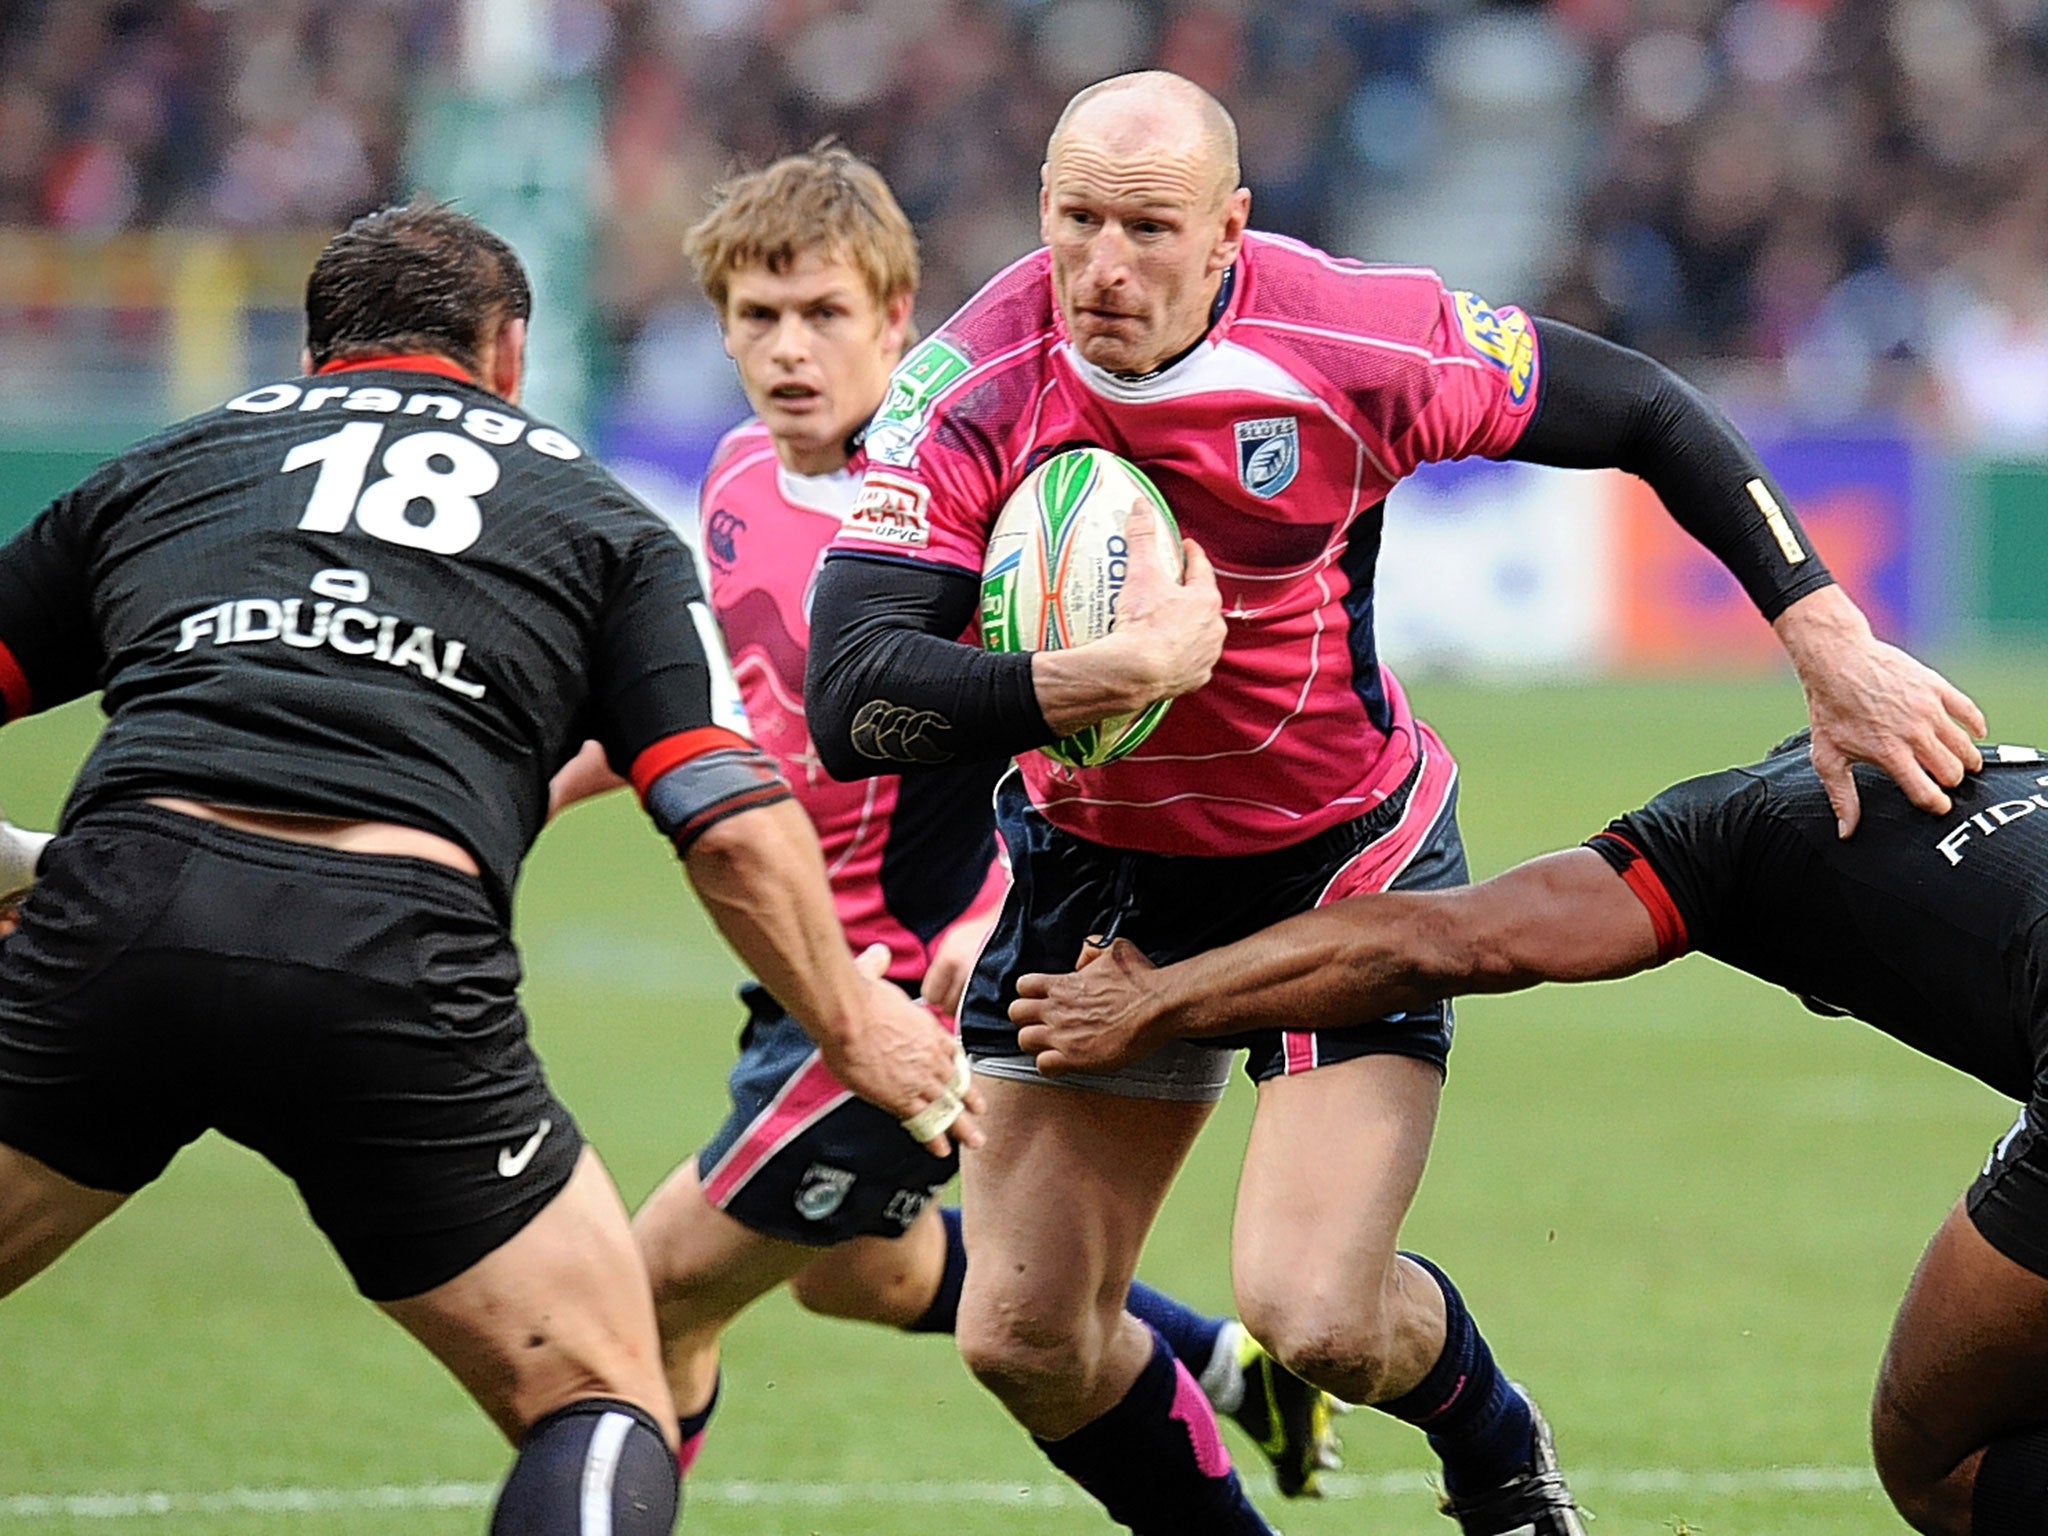 Gareth Thomas proudly sports the pink change shirt of the Cardiff Blues. ‘They’ve got your colour for you,’ joked a team-mate